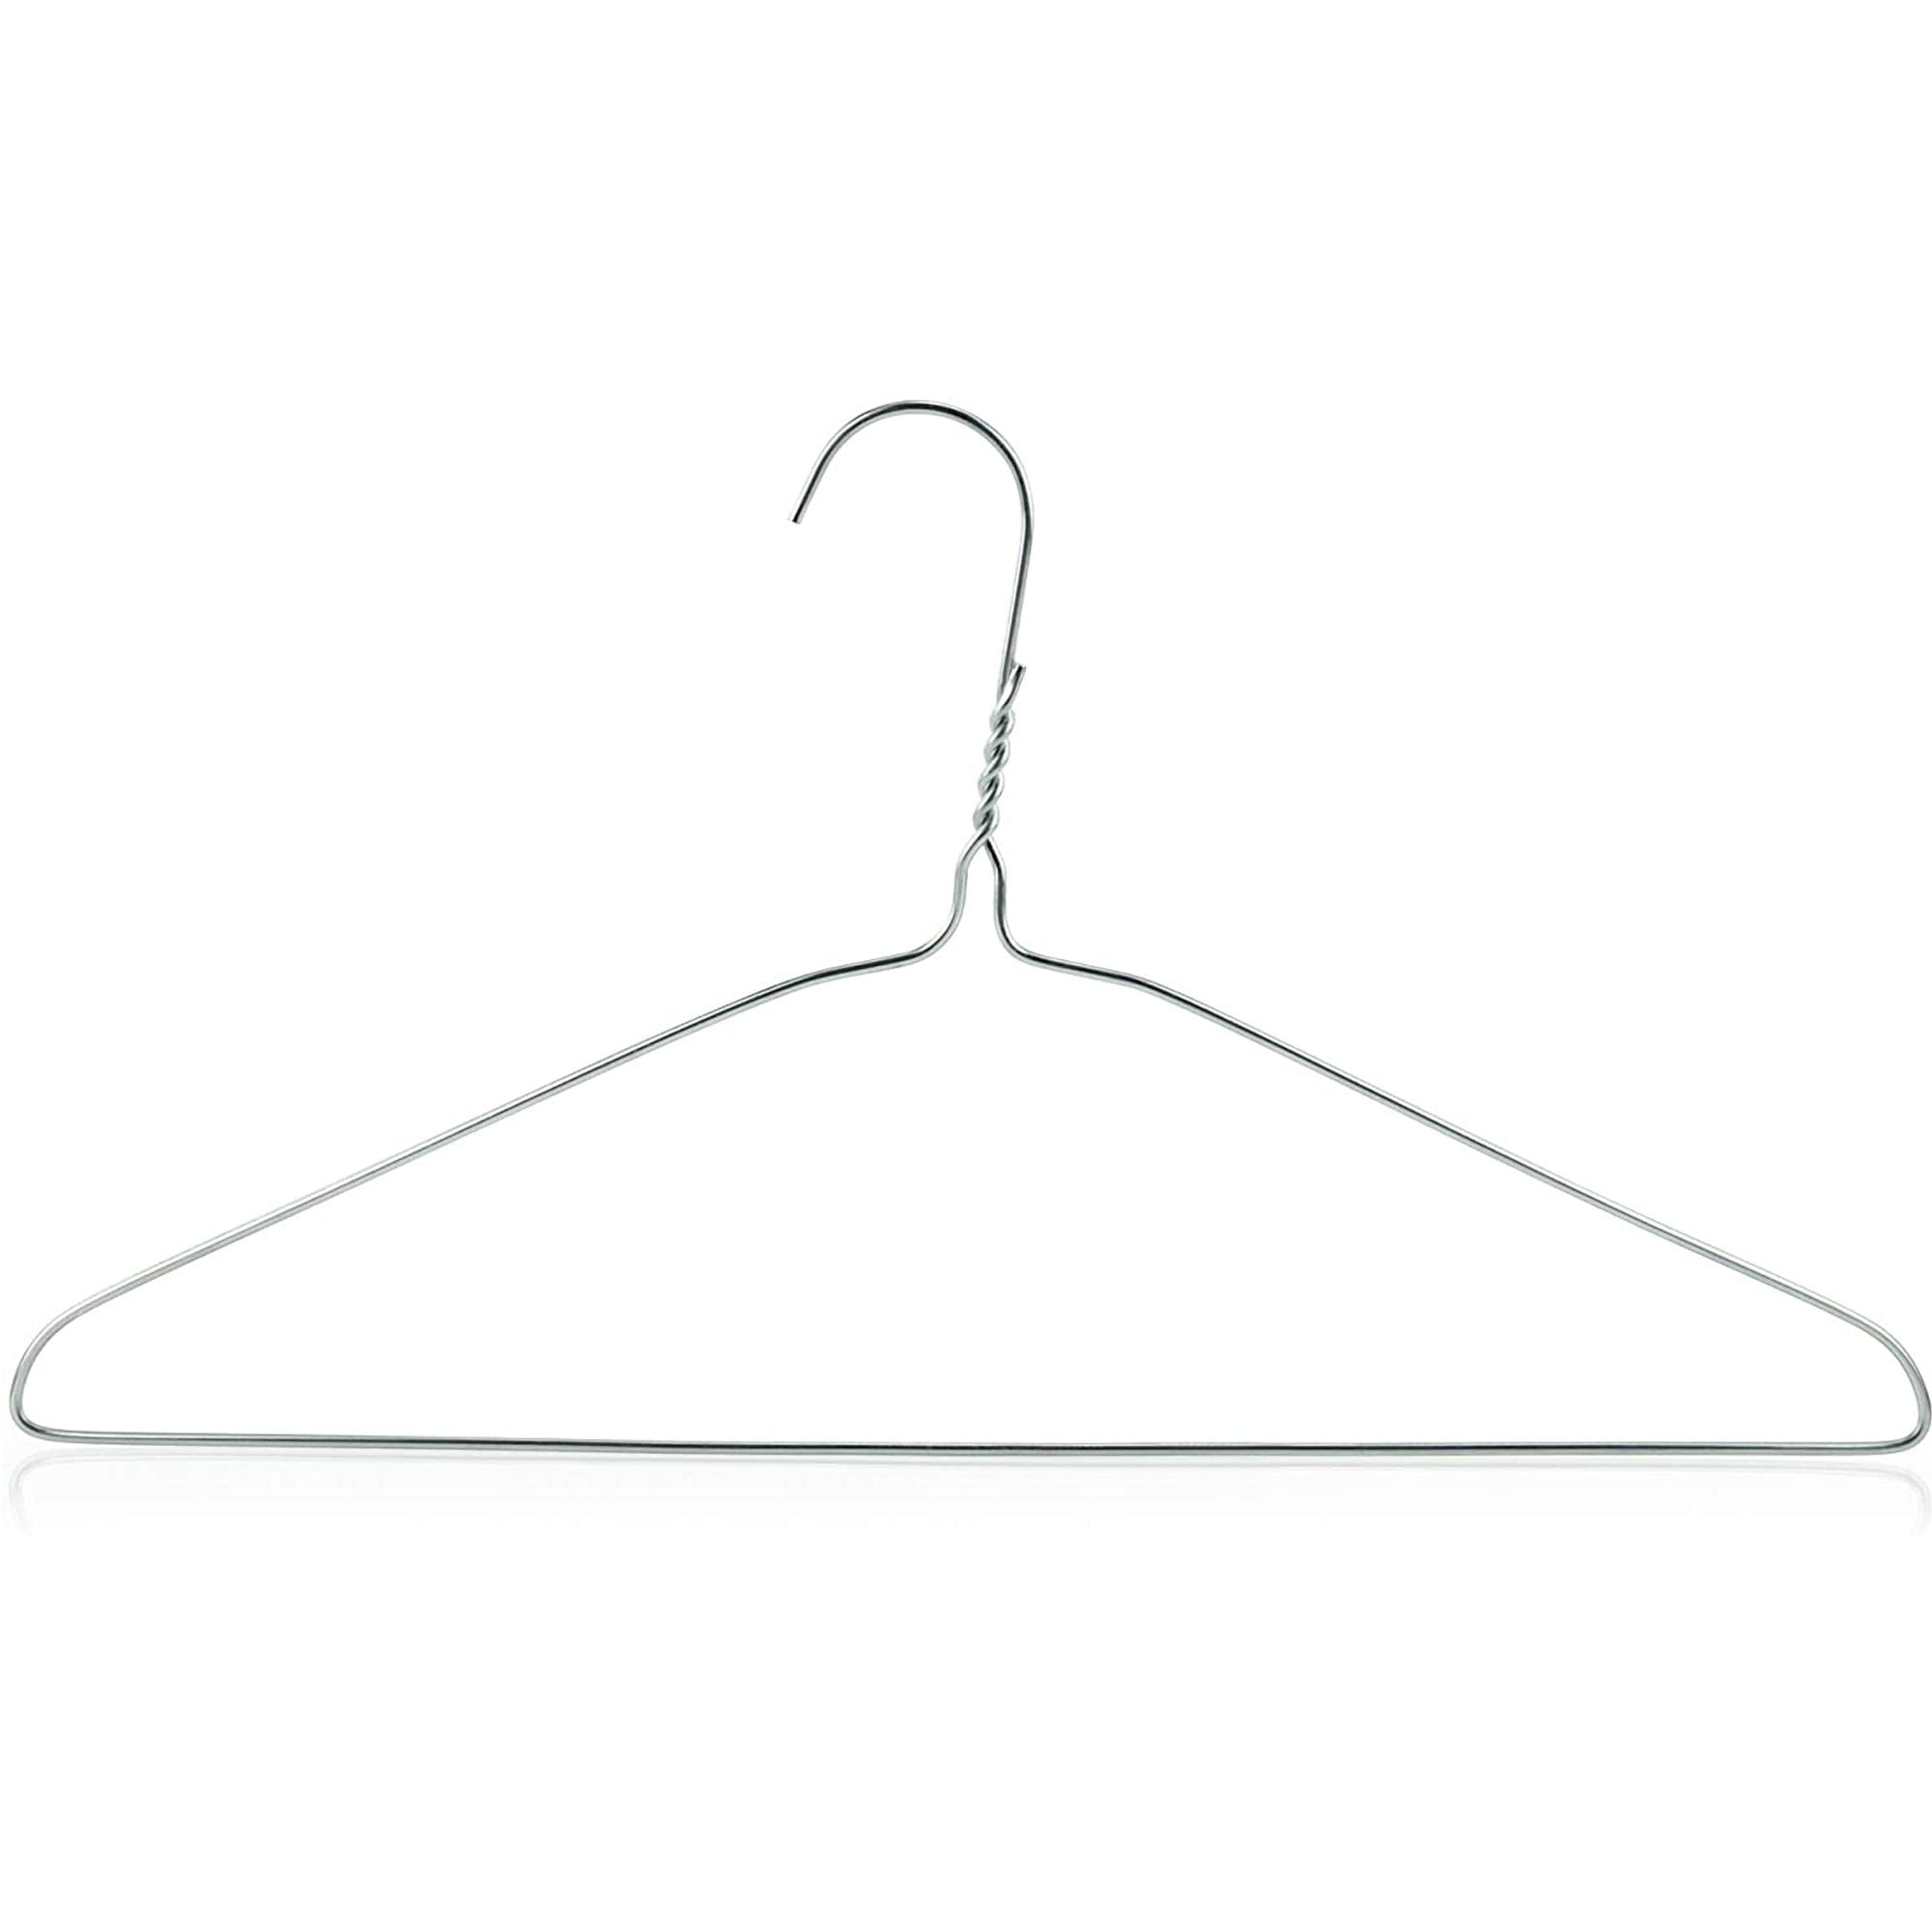 Uniform,16 inch Clothes Coat 50 Strong Metal Hangers Wire Silver Color 